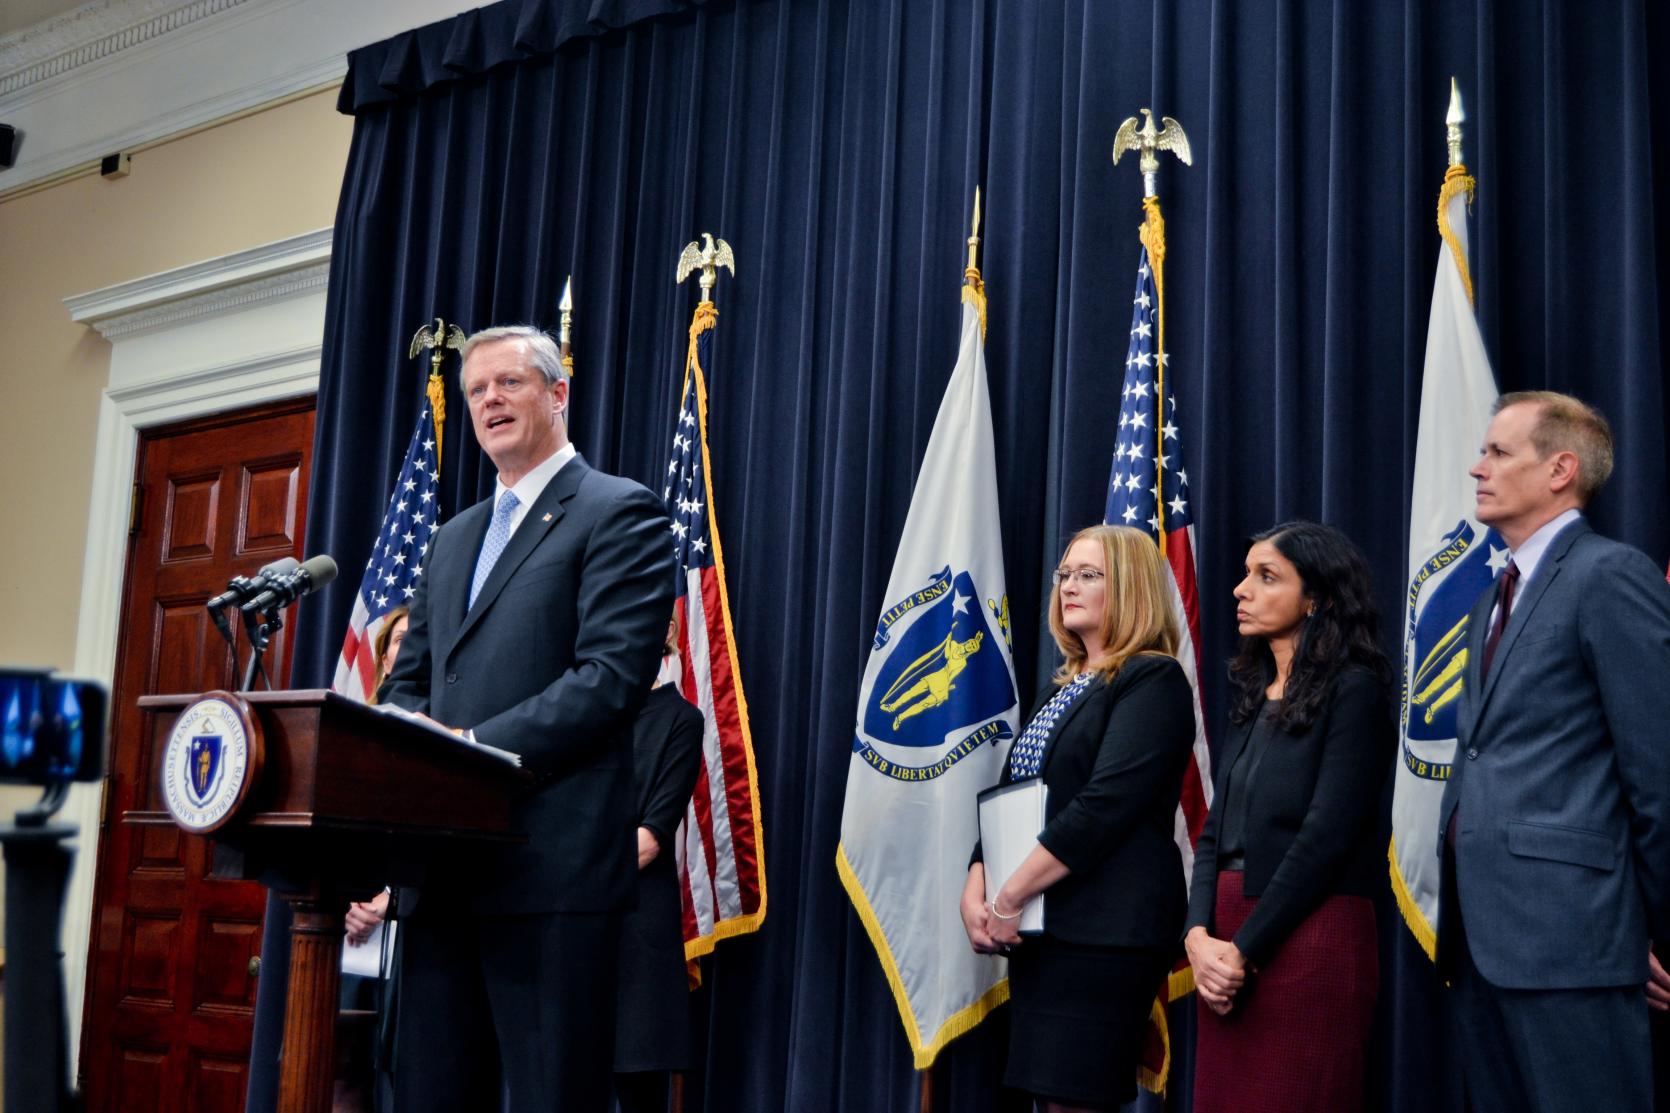 Governor Baker announces the second significant package to fight the opioid and heroin epidemic